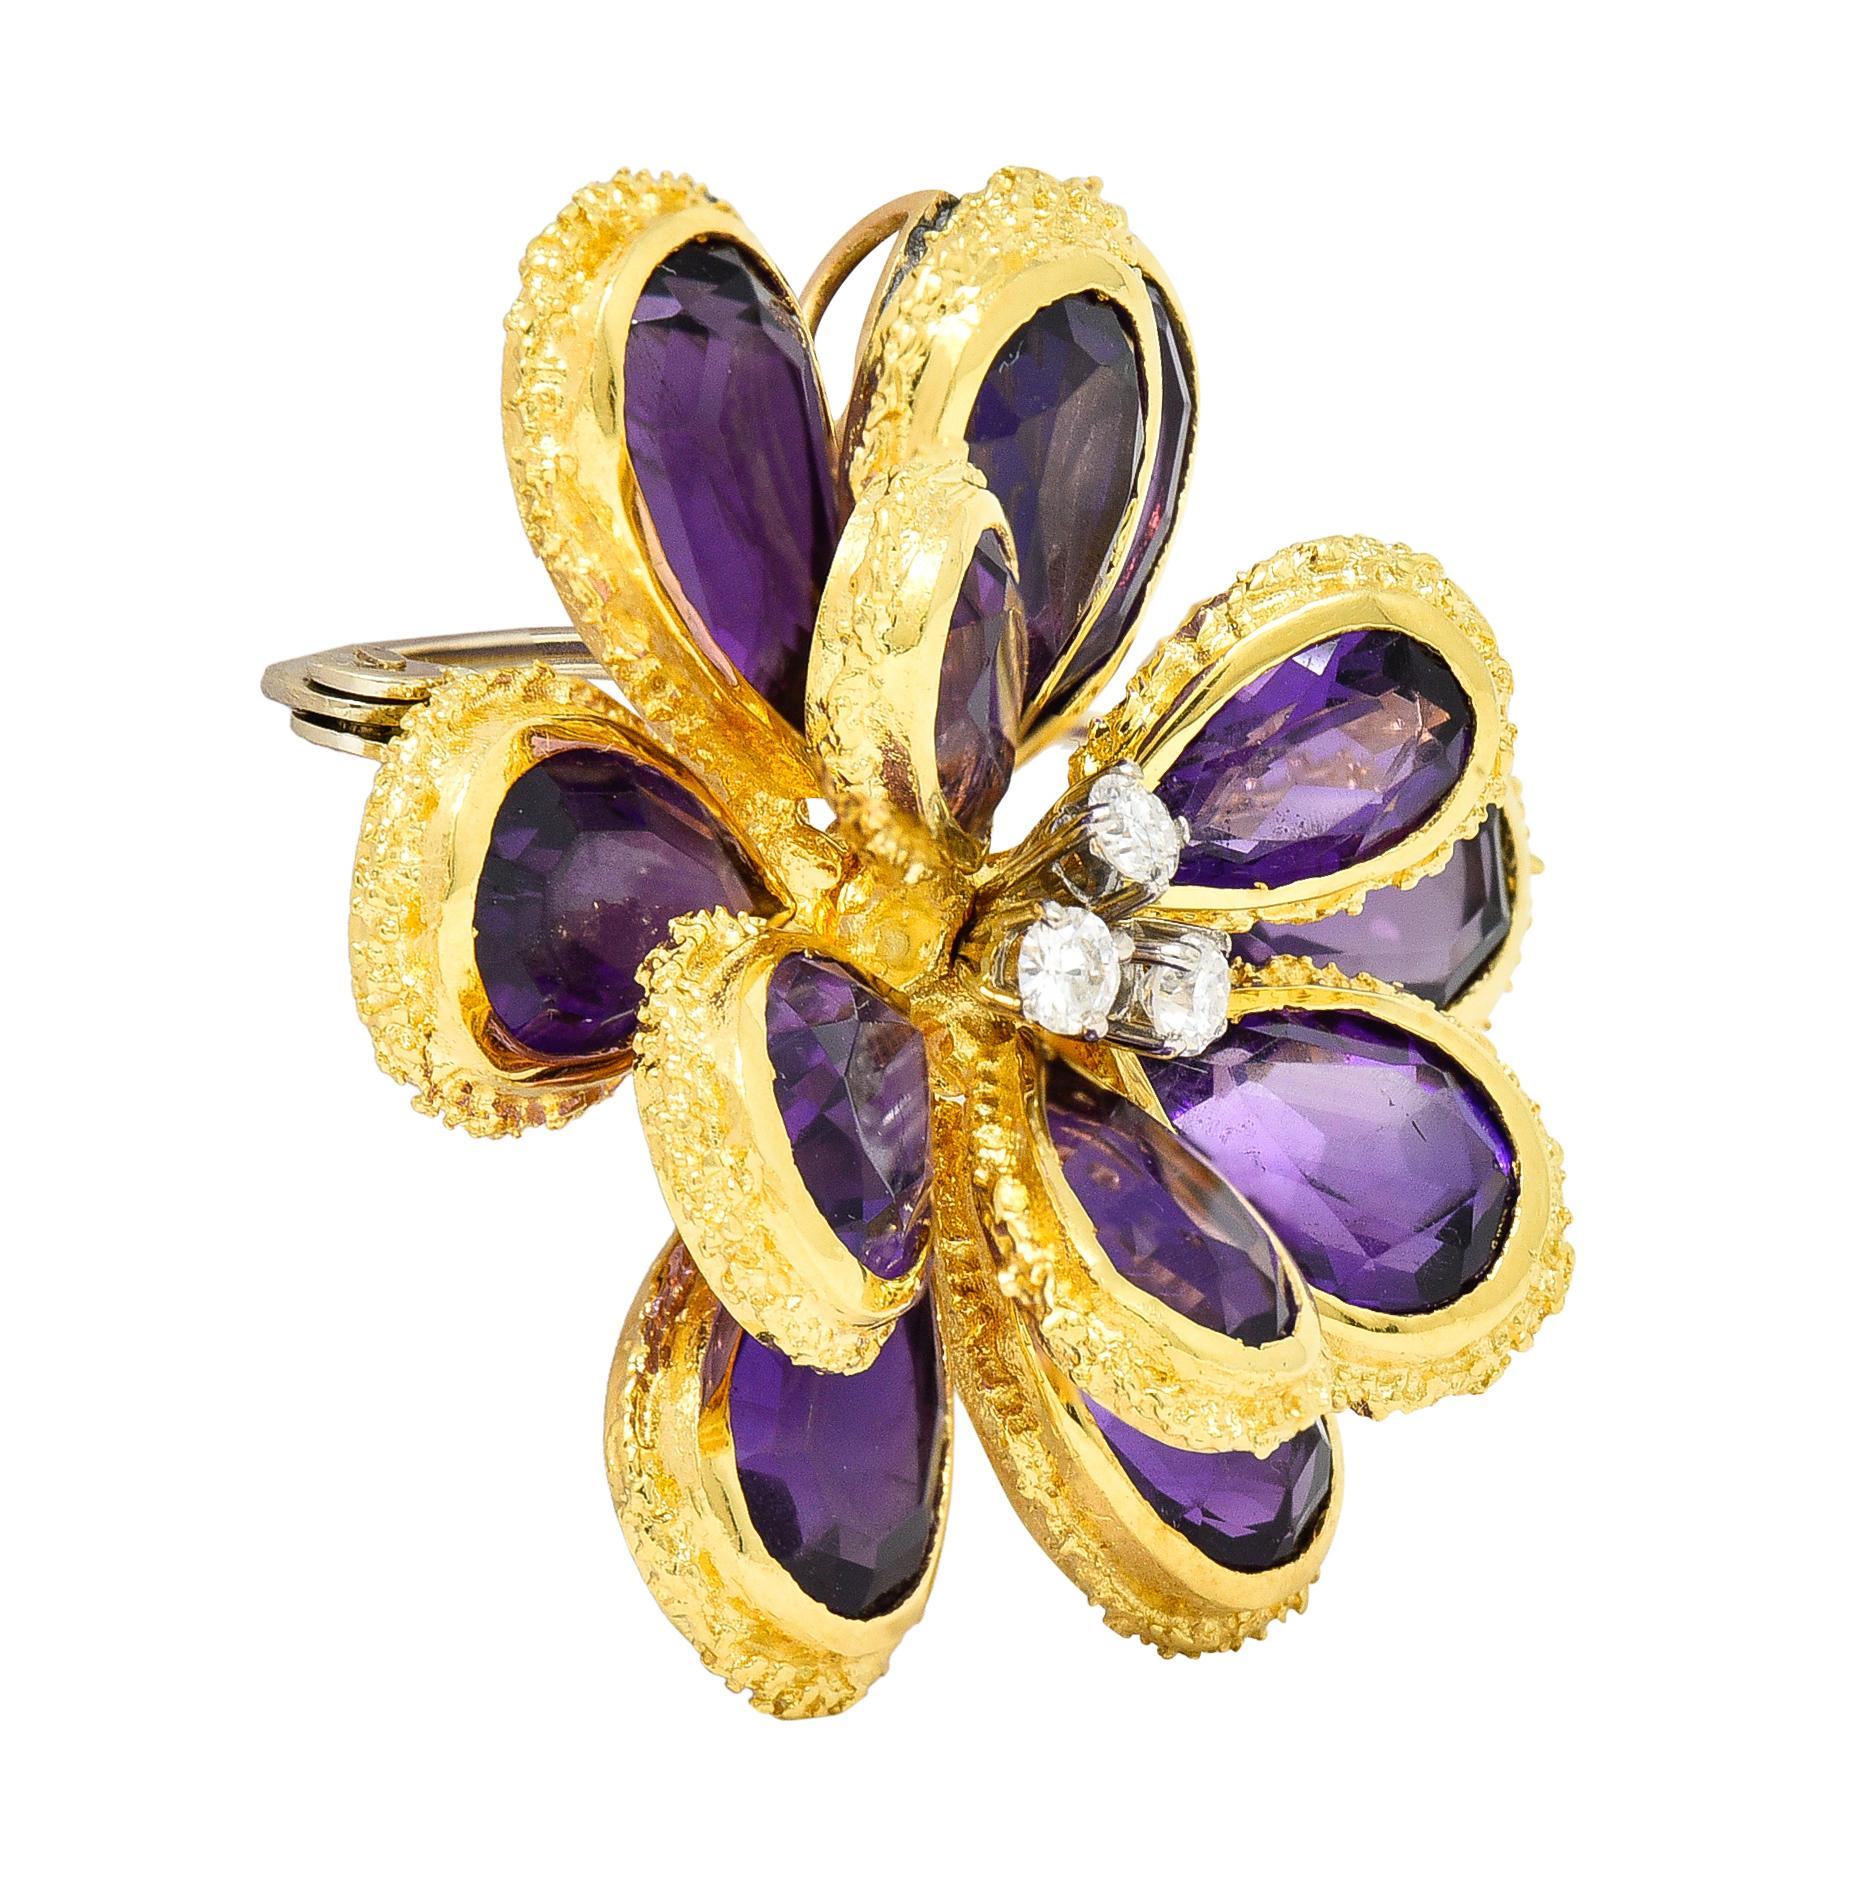 Designed as a flower with dimensional petals comprised of bezel set pear cut amethysts

Transparent purple in color with medium saturation - bezels feature organic texture surrounds

Centering round brilliant cut diamonds prong set in white